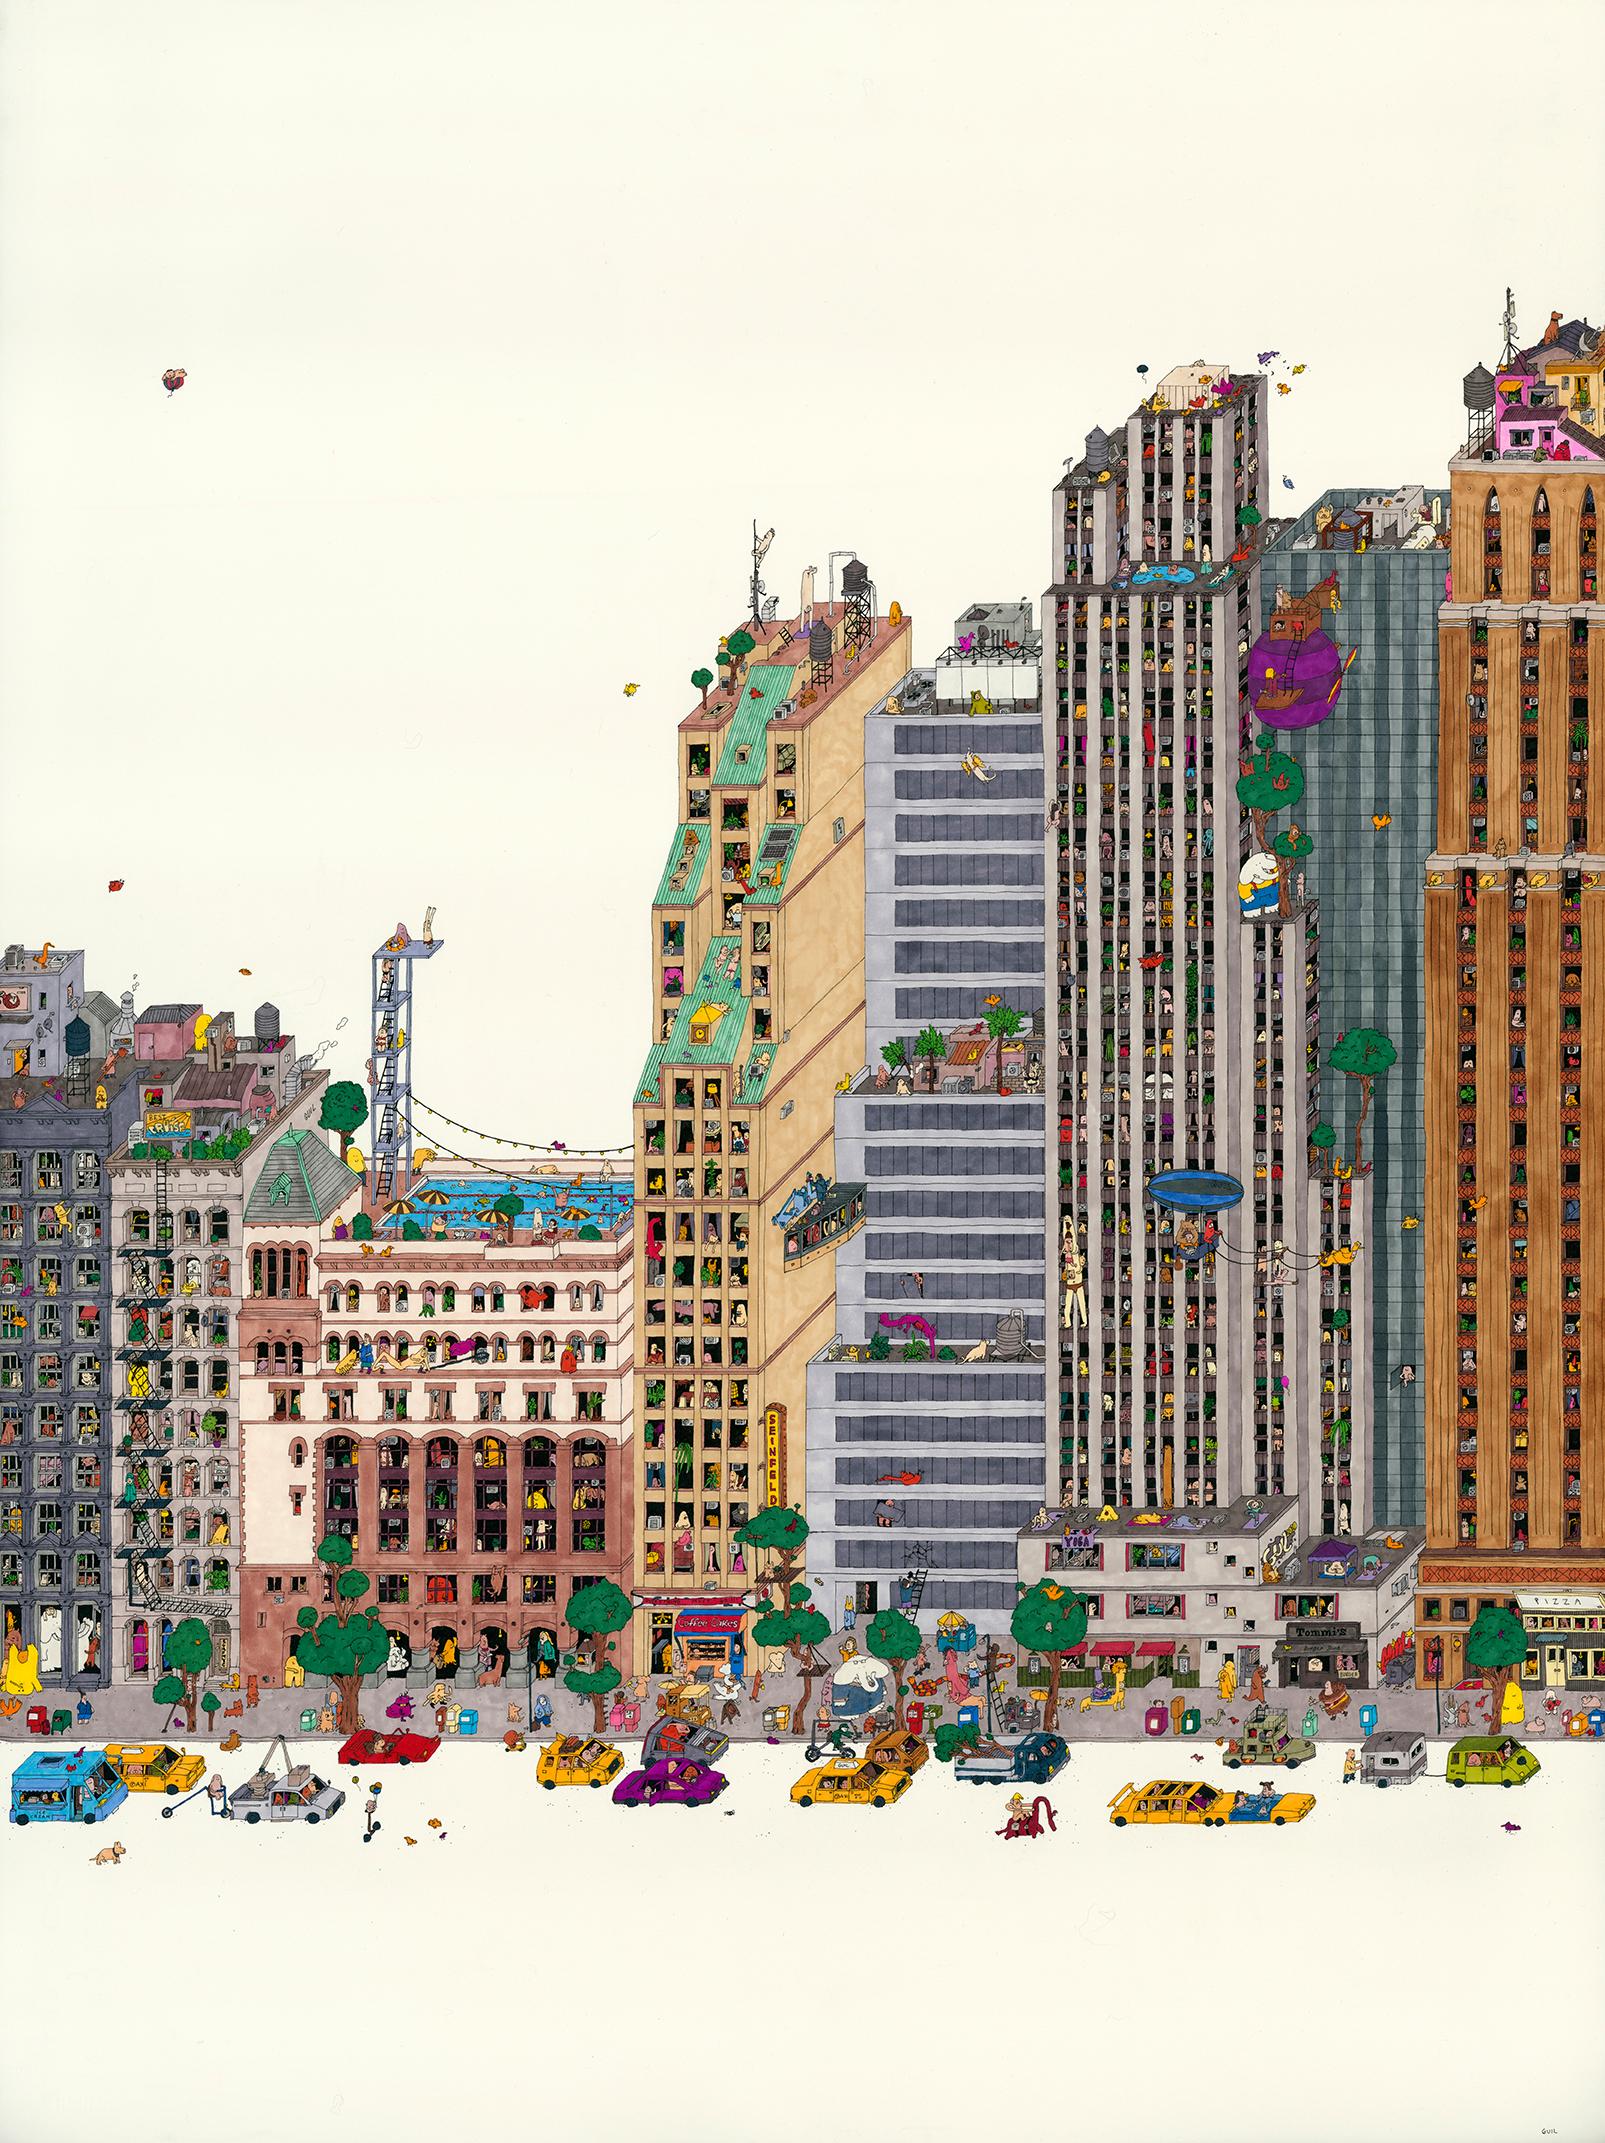 Everything Must Go, an intricate illustration by Guillaume Cornet white framed